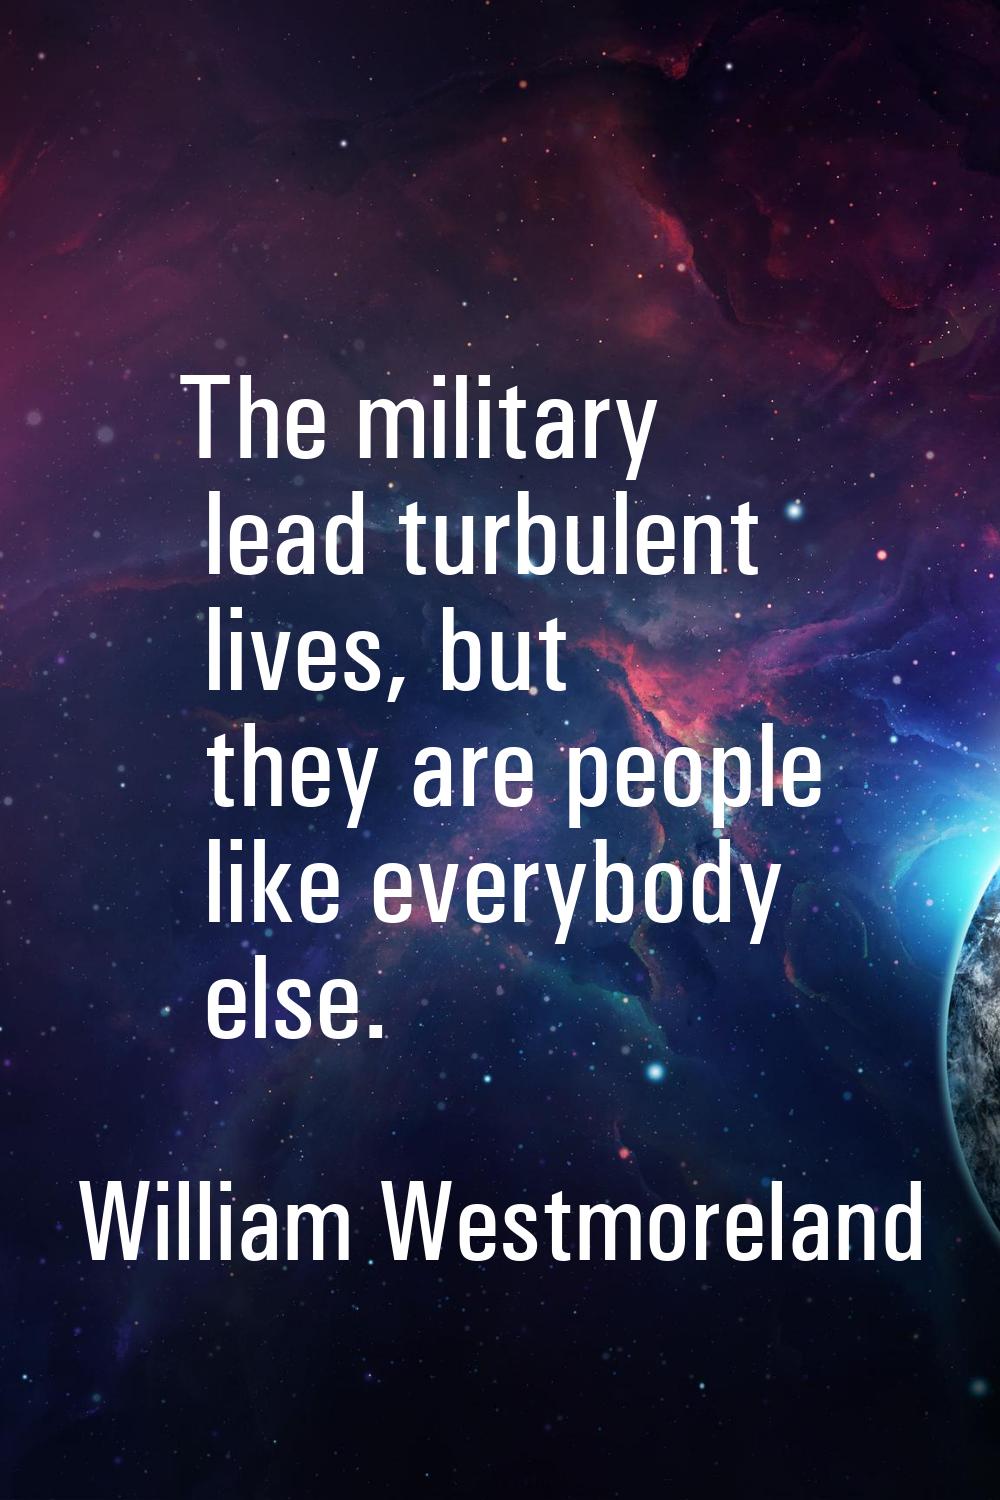 The military lead turbulent lives, but they are people like everybody else.